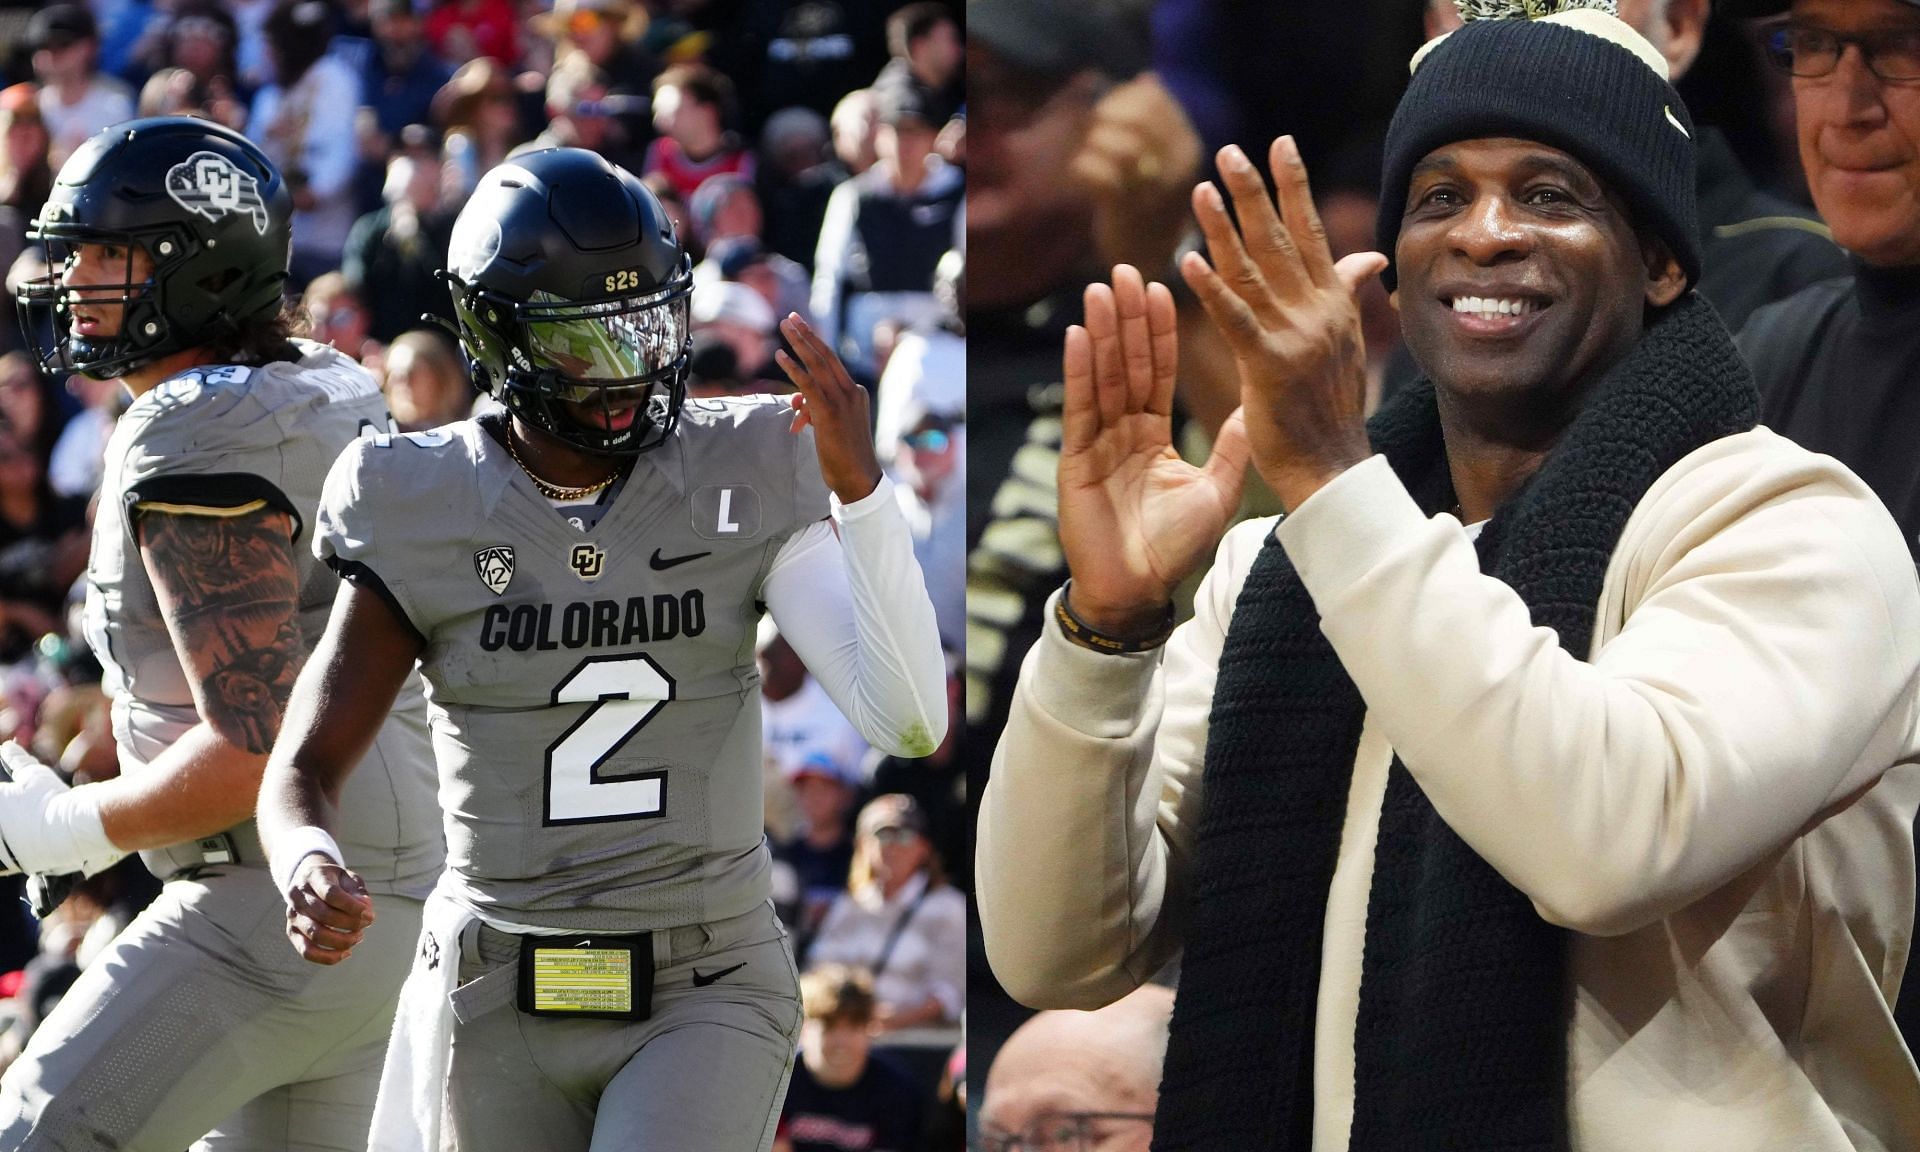 Shedeur Sanders, the son of Deion Sanders, shows no concern regarding the transfer issues faced by Colorado.